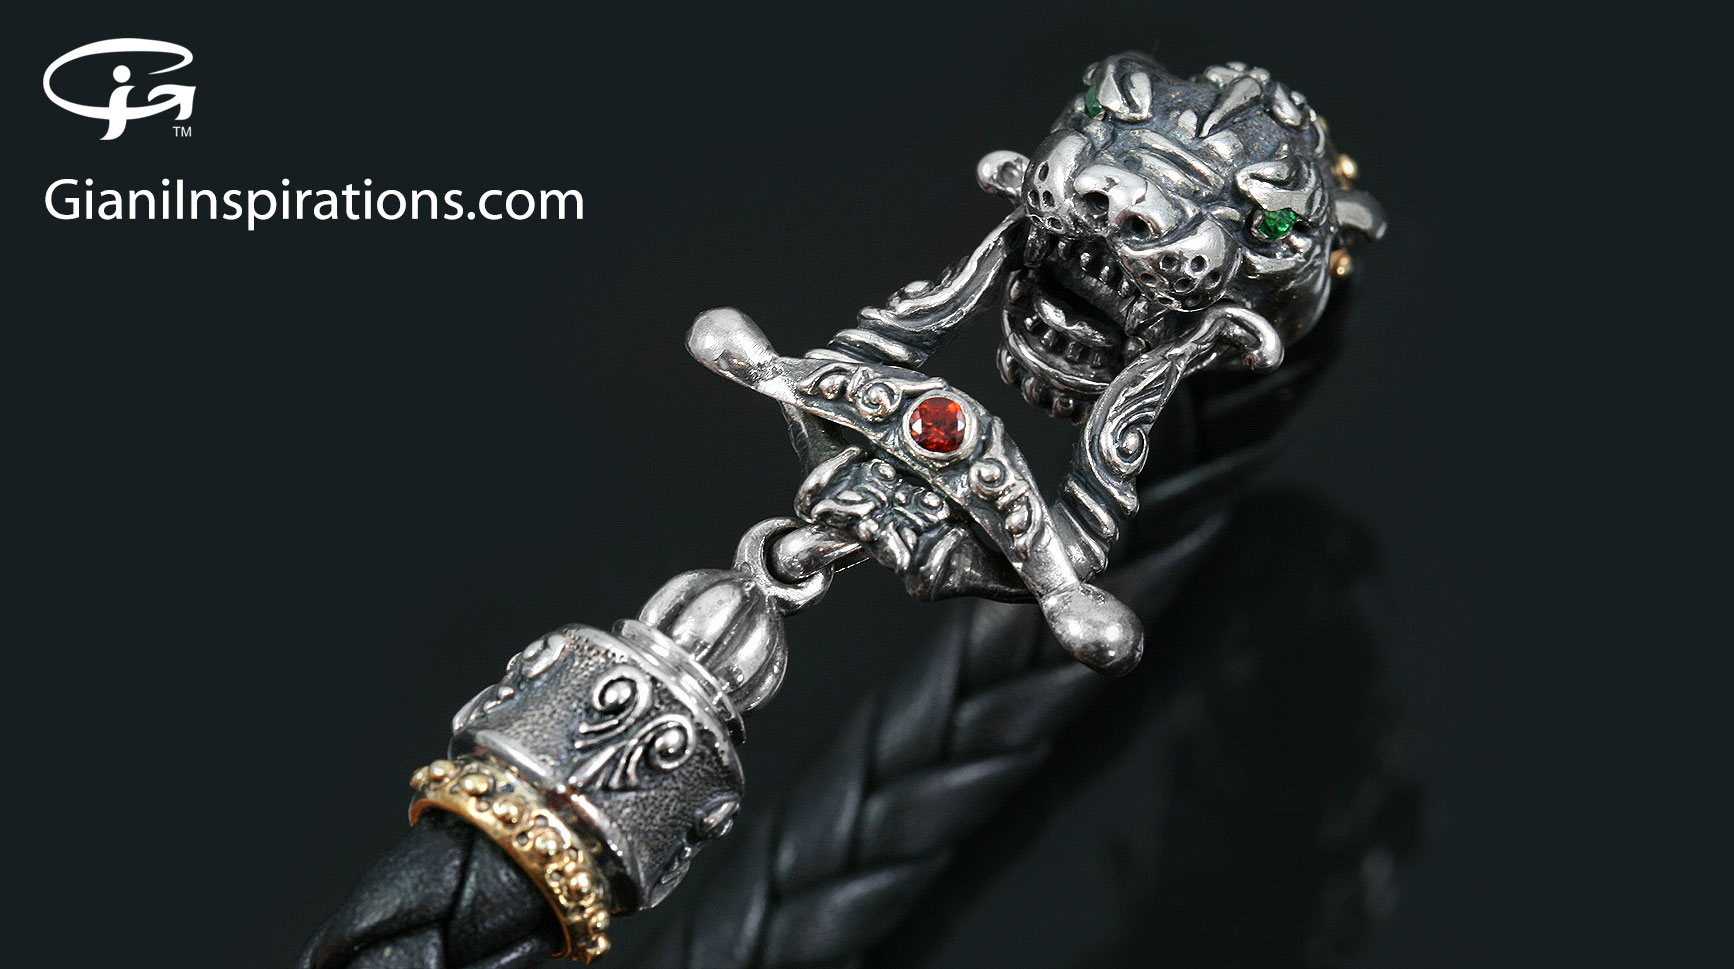 Panther Head Design in Silver Bracelet with CZ Diamonds